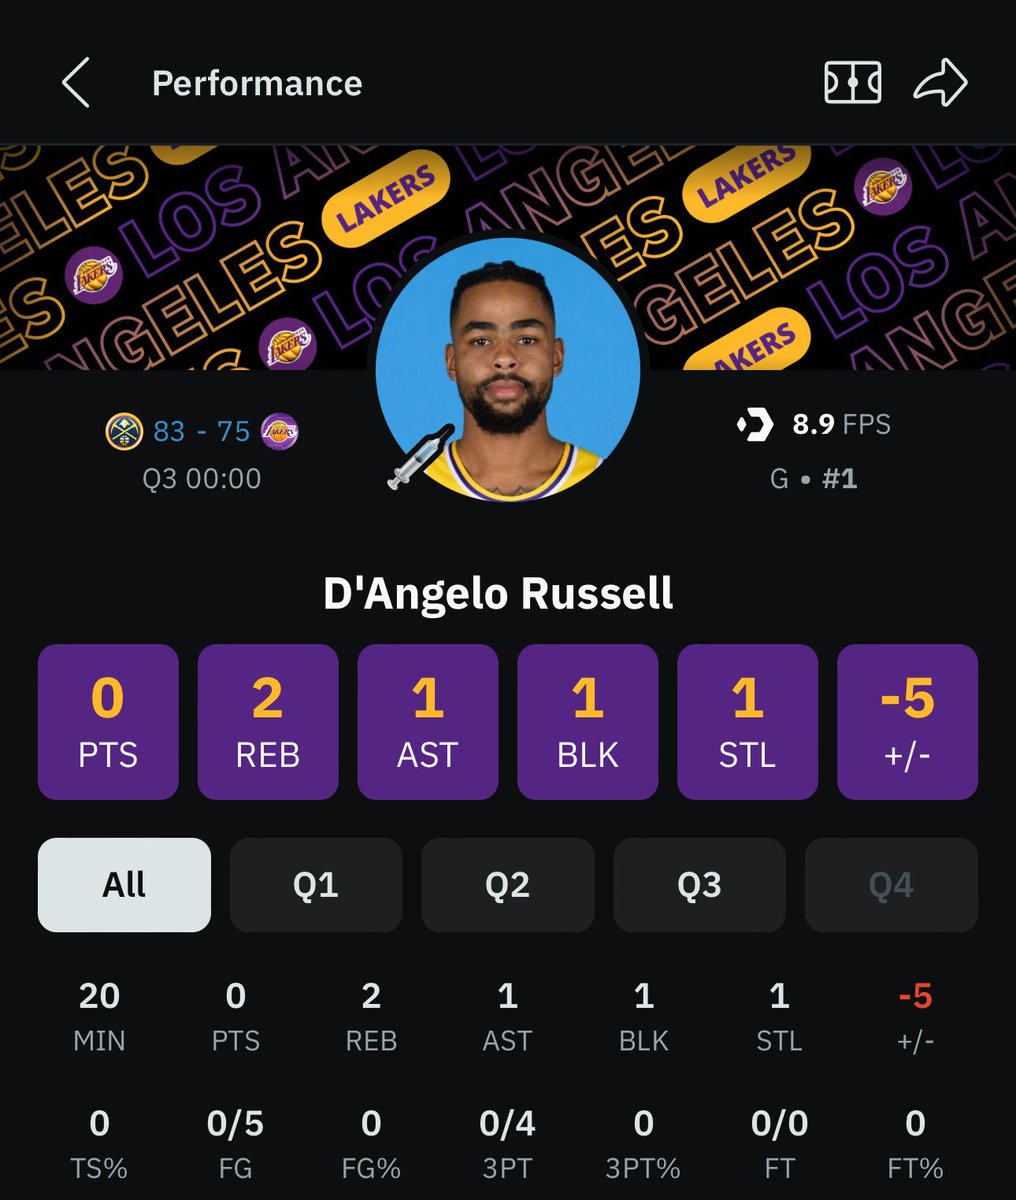 D’Angelo Russell through 3 quarters…